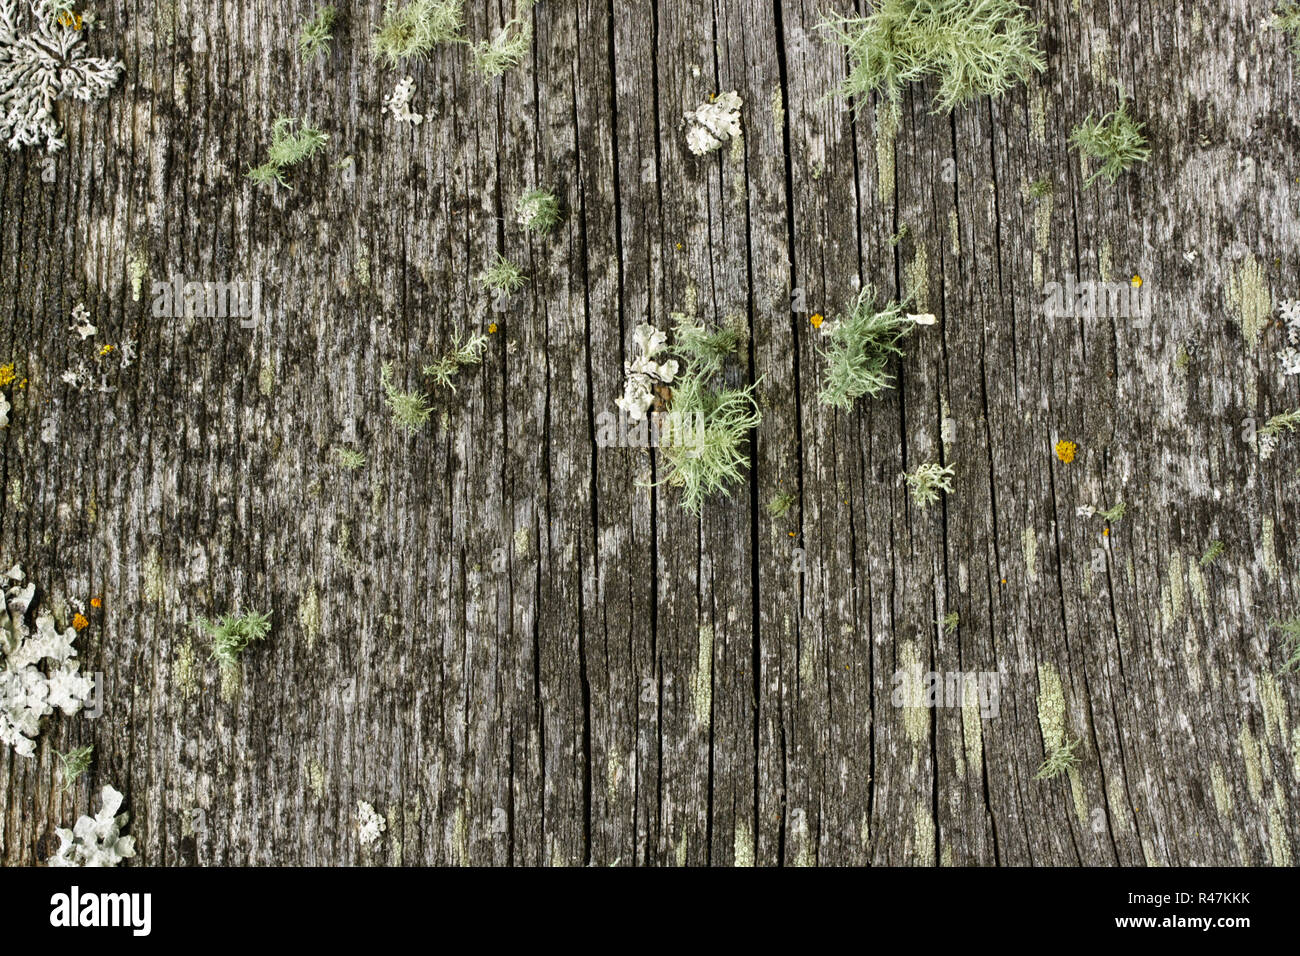 wooden board with lichen Stock Photo